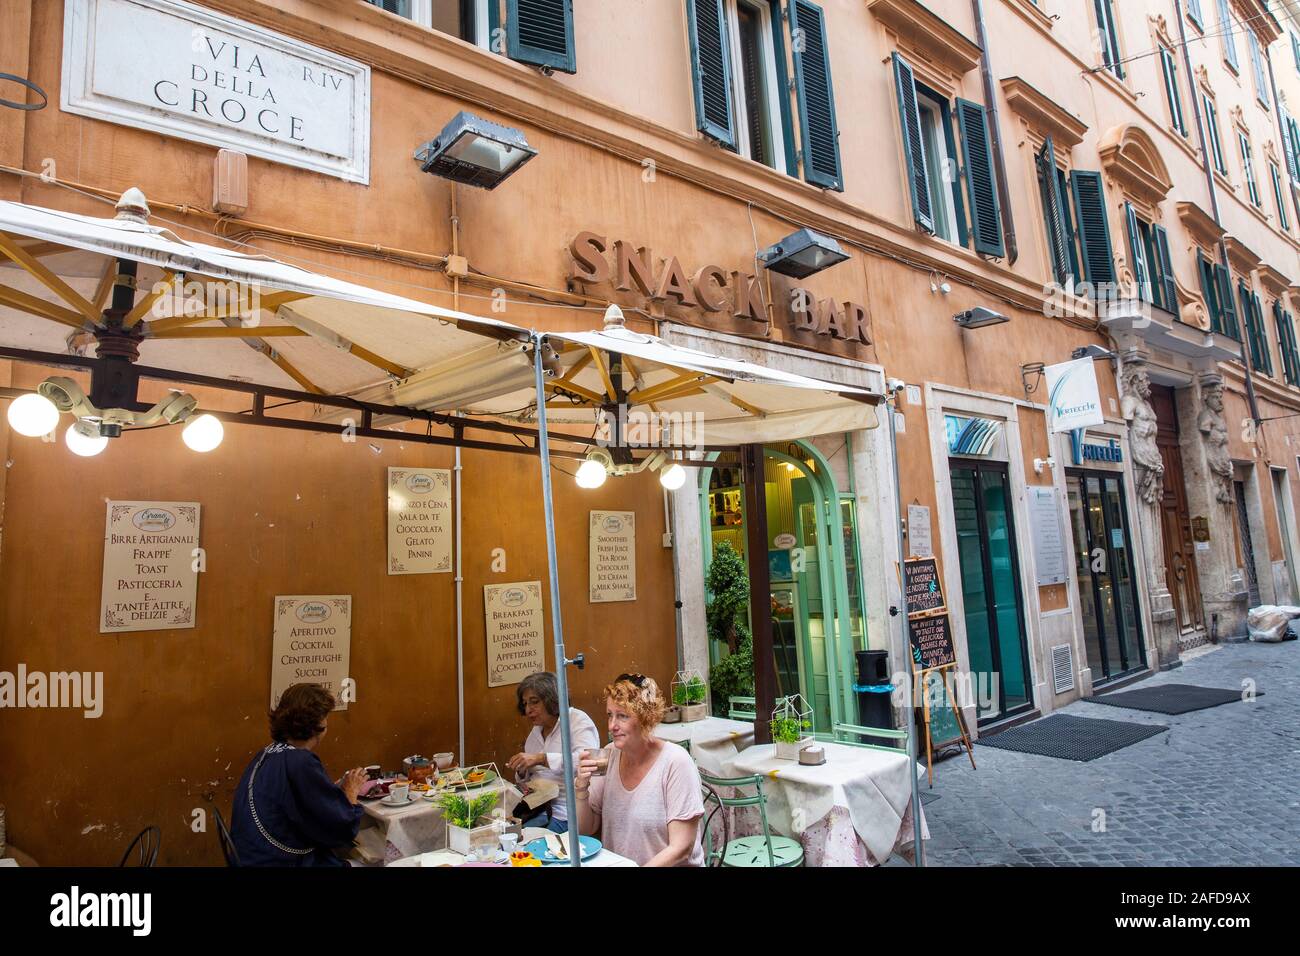 Rome snack bar Italy, women eating at a snack bar cafe in Rome city centre,Lazio,Italy,Europe Stock Photo